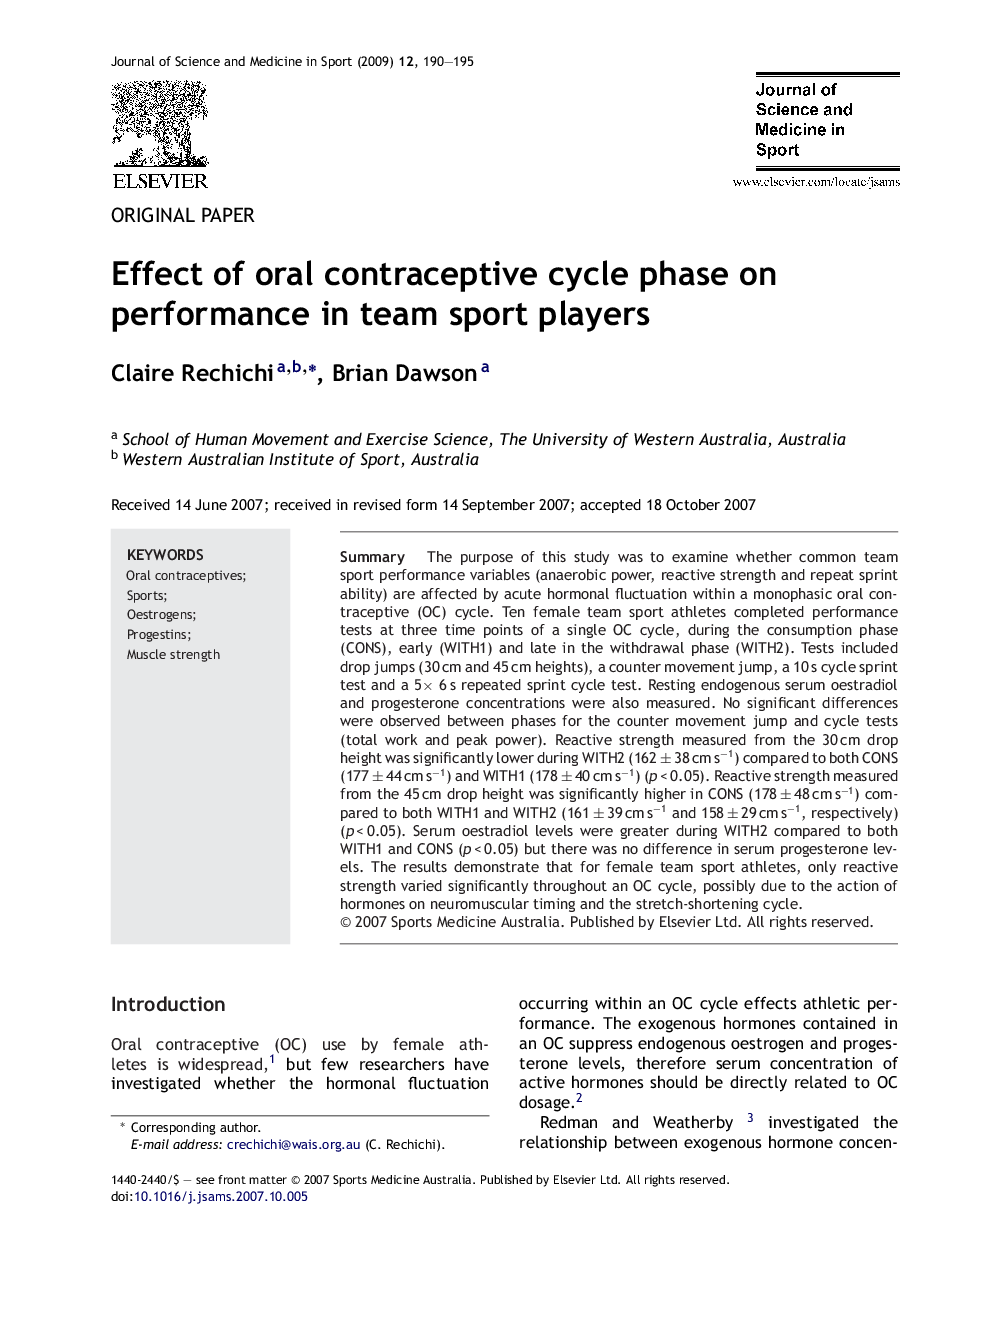 Effect of oral contraceptive cycle phase on performance in team sport players